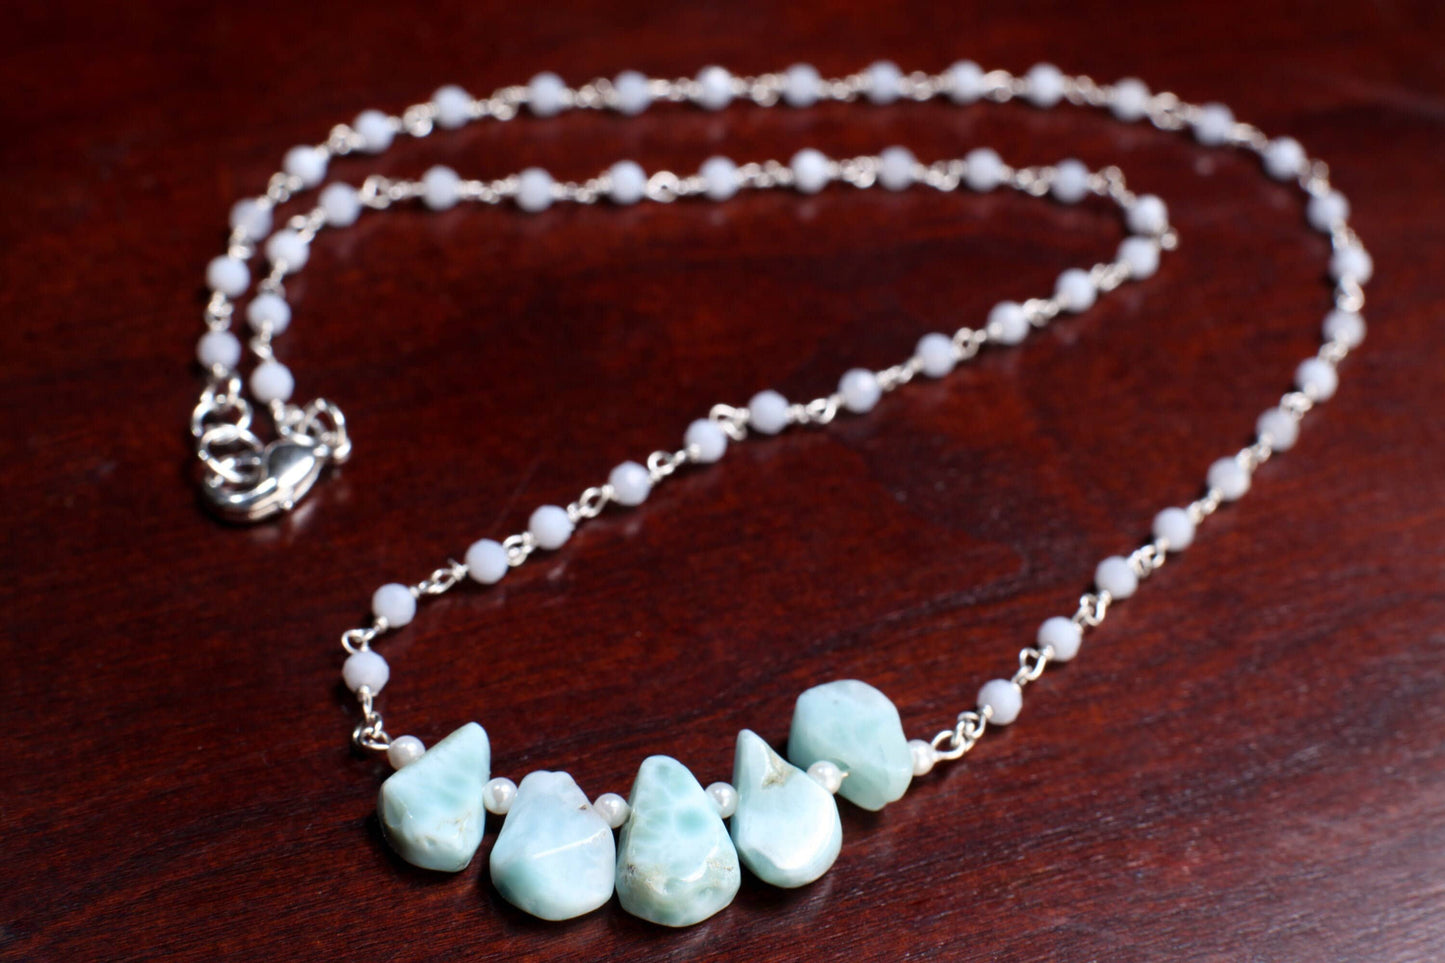 Natural Larimar Raw Free Form Teardrop Necklace with Blue Lace Agate Gemstone Chain and 925 Sterling Silver Clasp 19&quot;Handmade Necklace